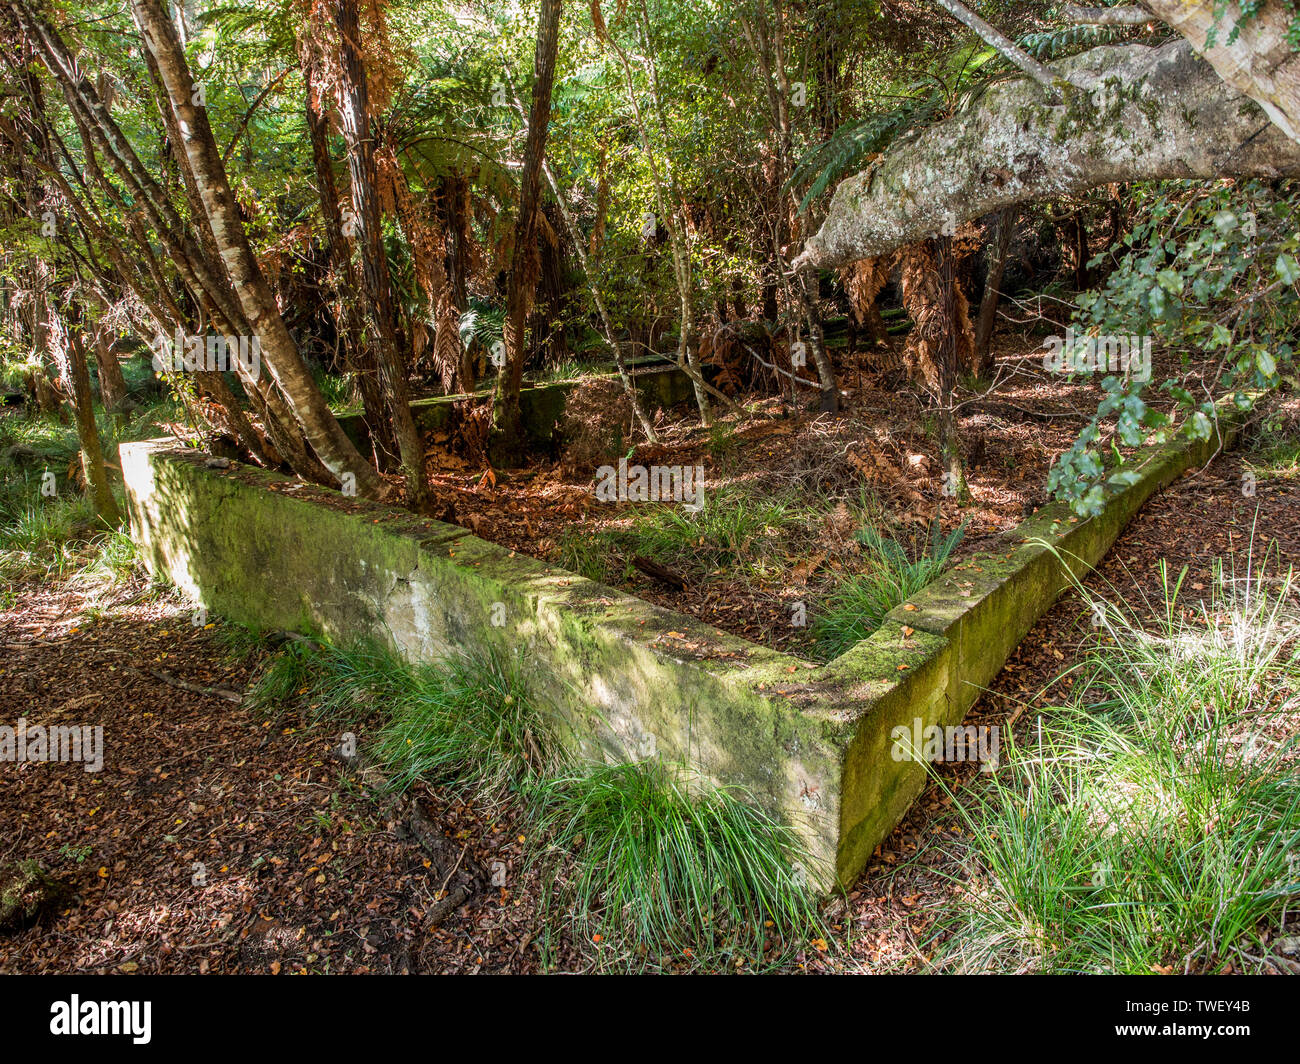 Regenerating forest and concrete building foundations, ruins of abandonded workshop,Whalers Base, Paterson Inlet, Rakiura Stewart Island, New Zealand Stock Photo